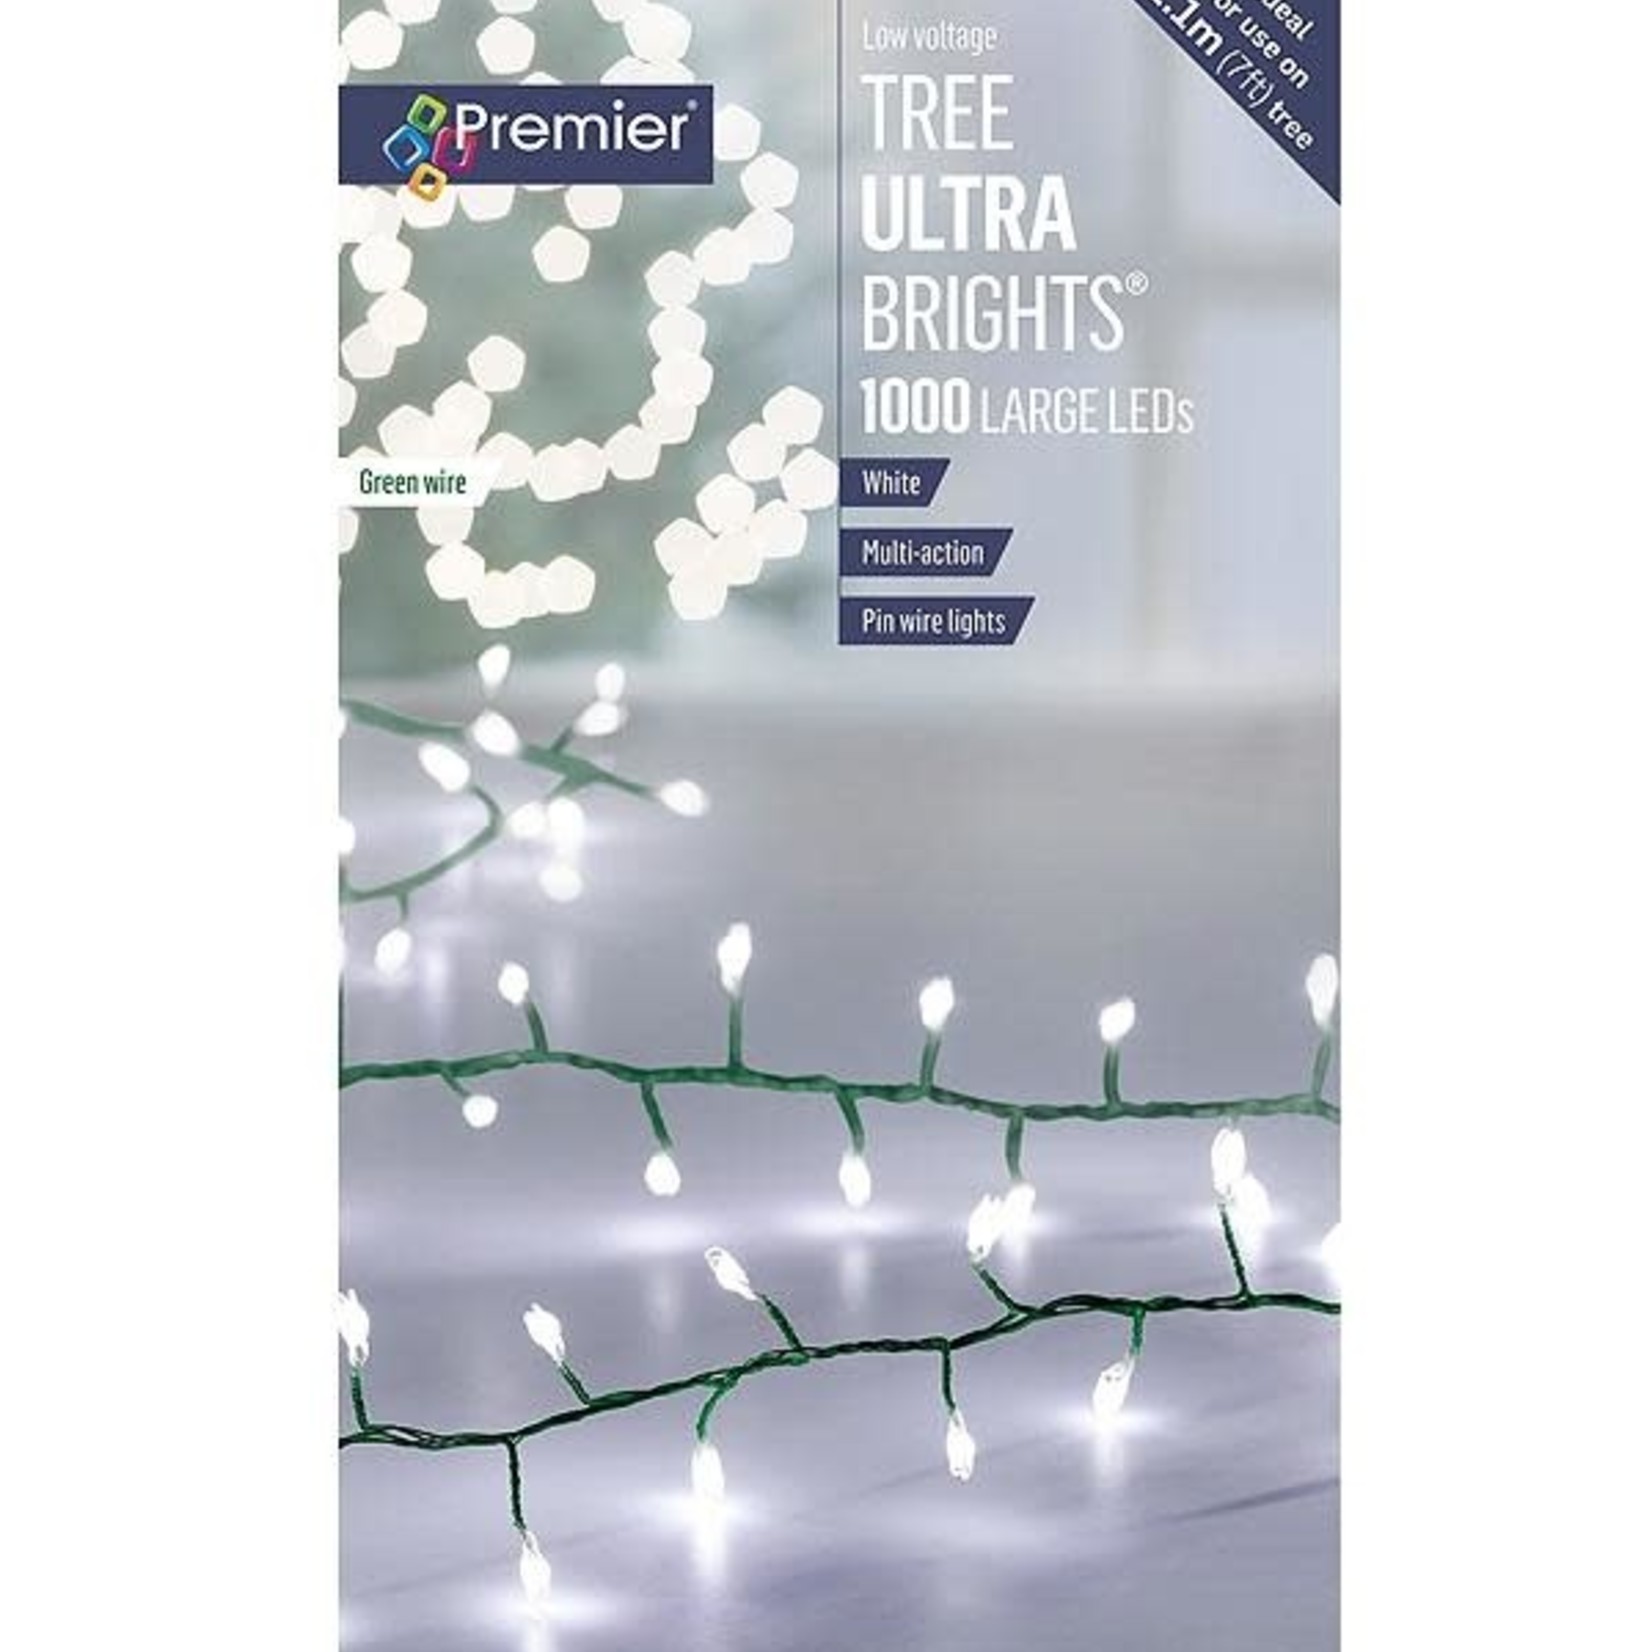 1000 M-A TreeUltraBrights Cool White LEDs Lights with timer